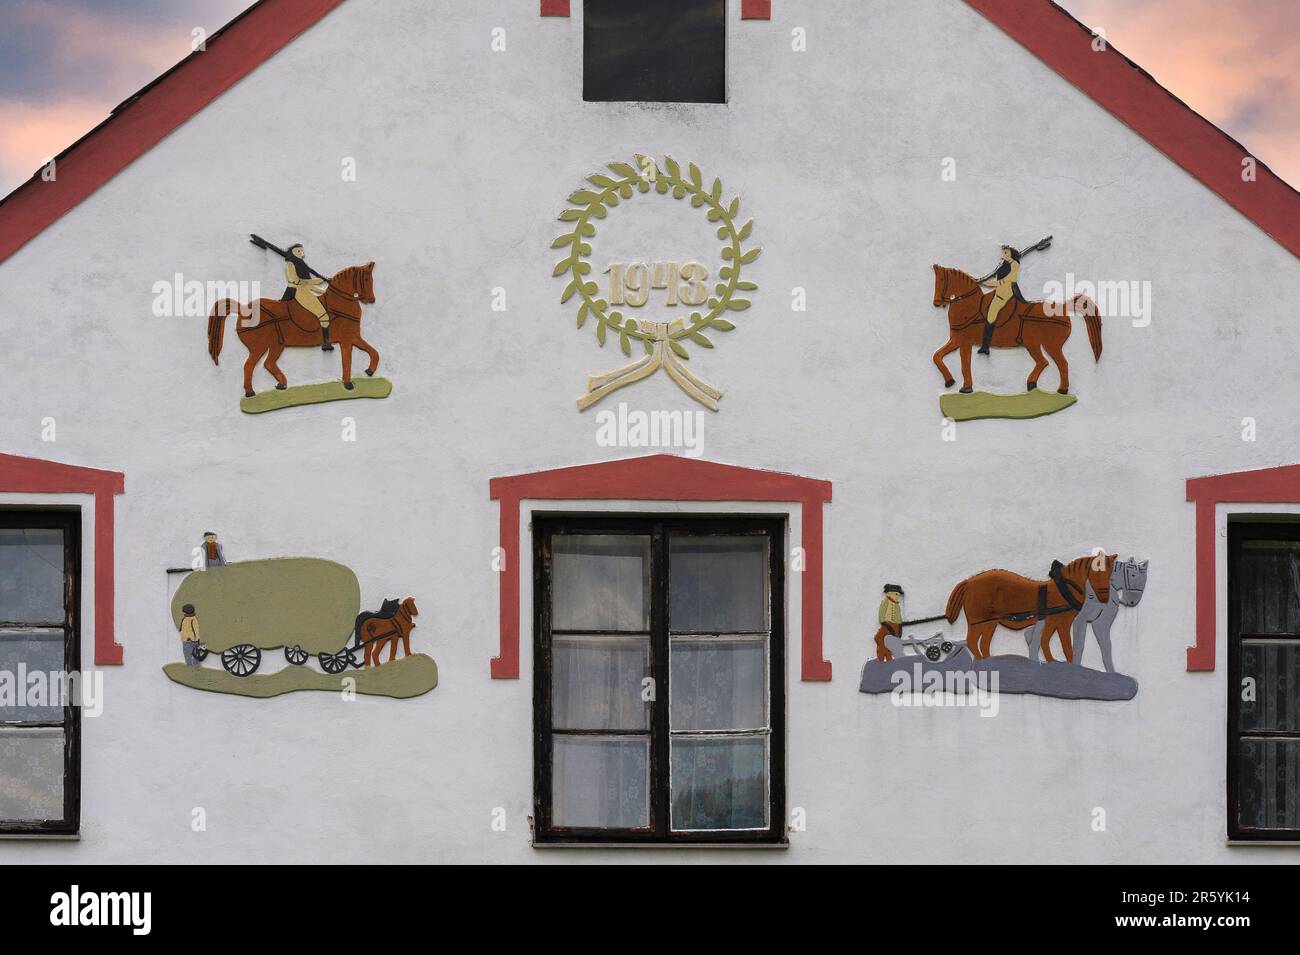 Decorated front of house dated 1943 in Holašovice, South Bohemia, Czech Republic or Czechia, a traditional village included in the UNESCO World Cultural Heritage List. Stock Photo